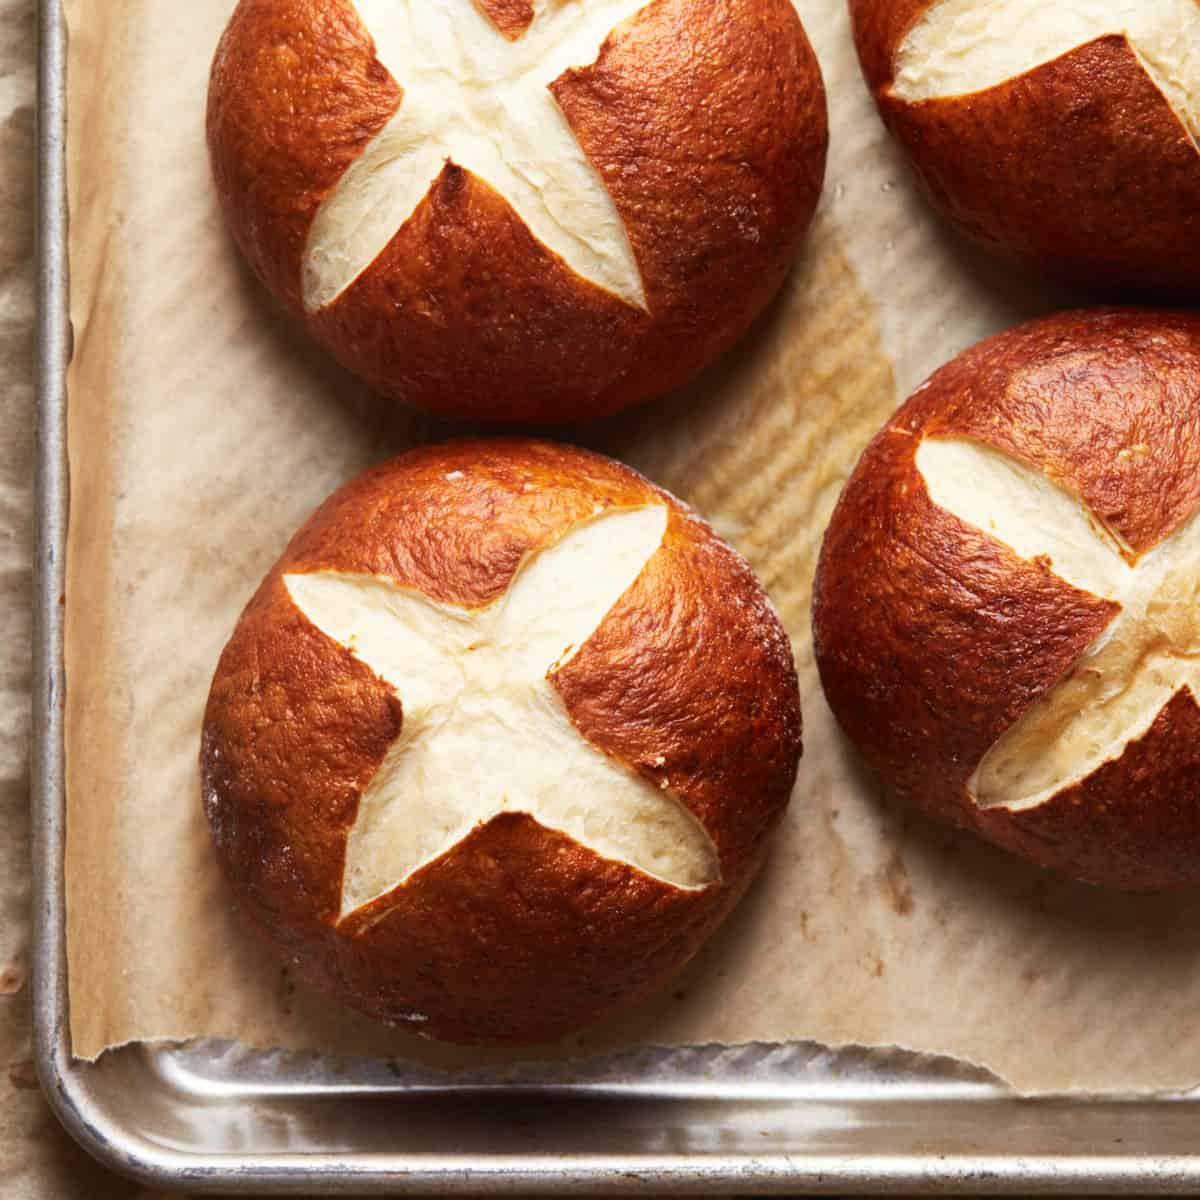 Top down view of baked pretzel buns on a baking sheet